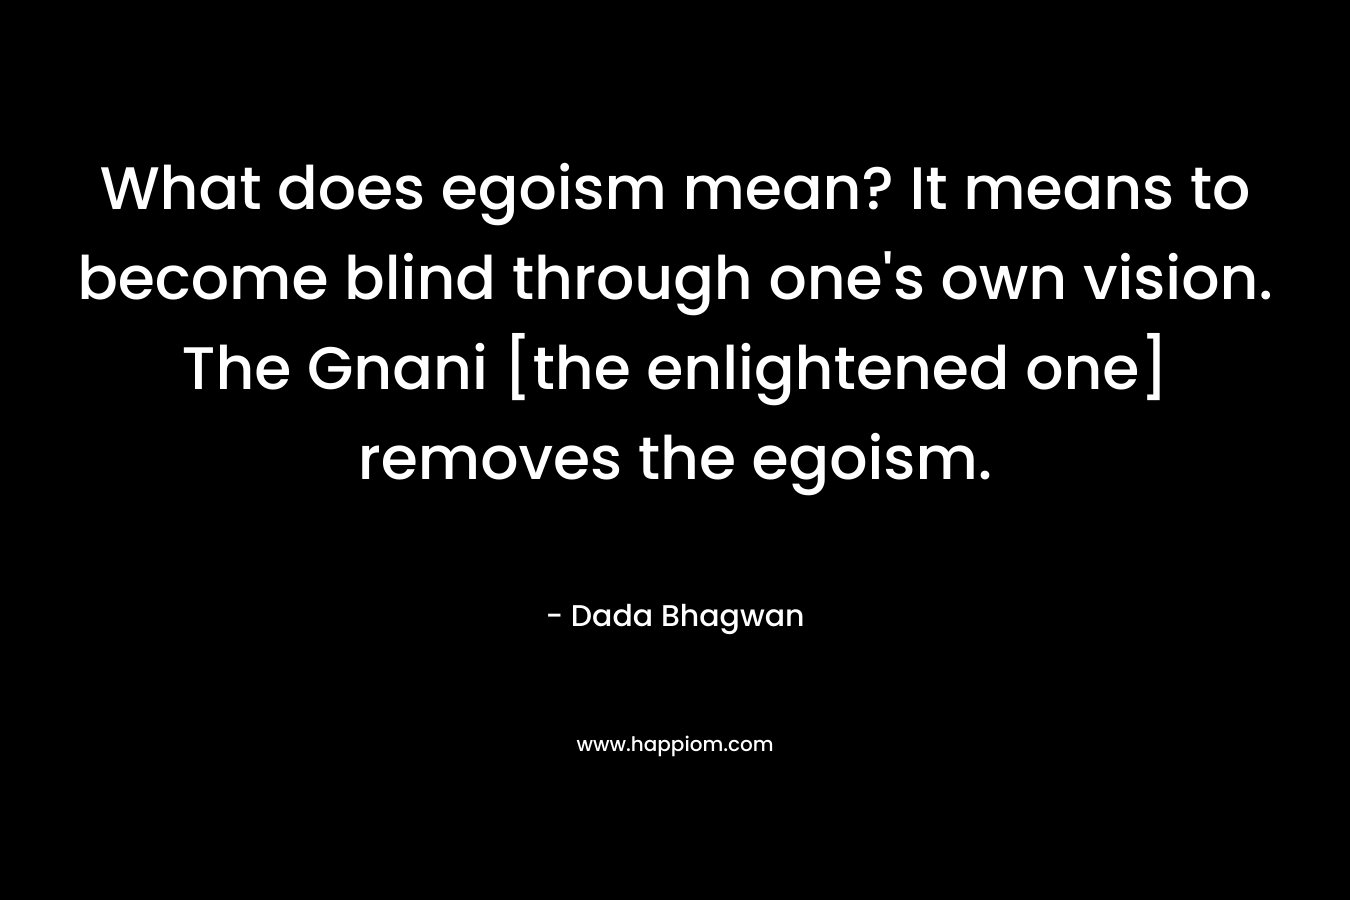 What does egoism mean? It means to become blind through one’s own vision. The Gnani [the enlightened one] removes the egoism. – Dada Bhagwan